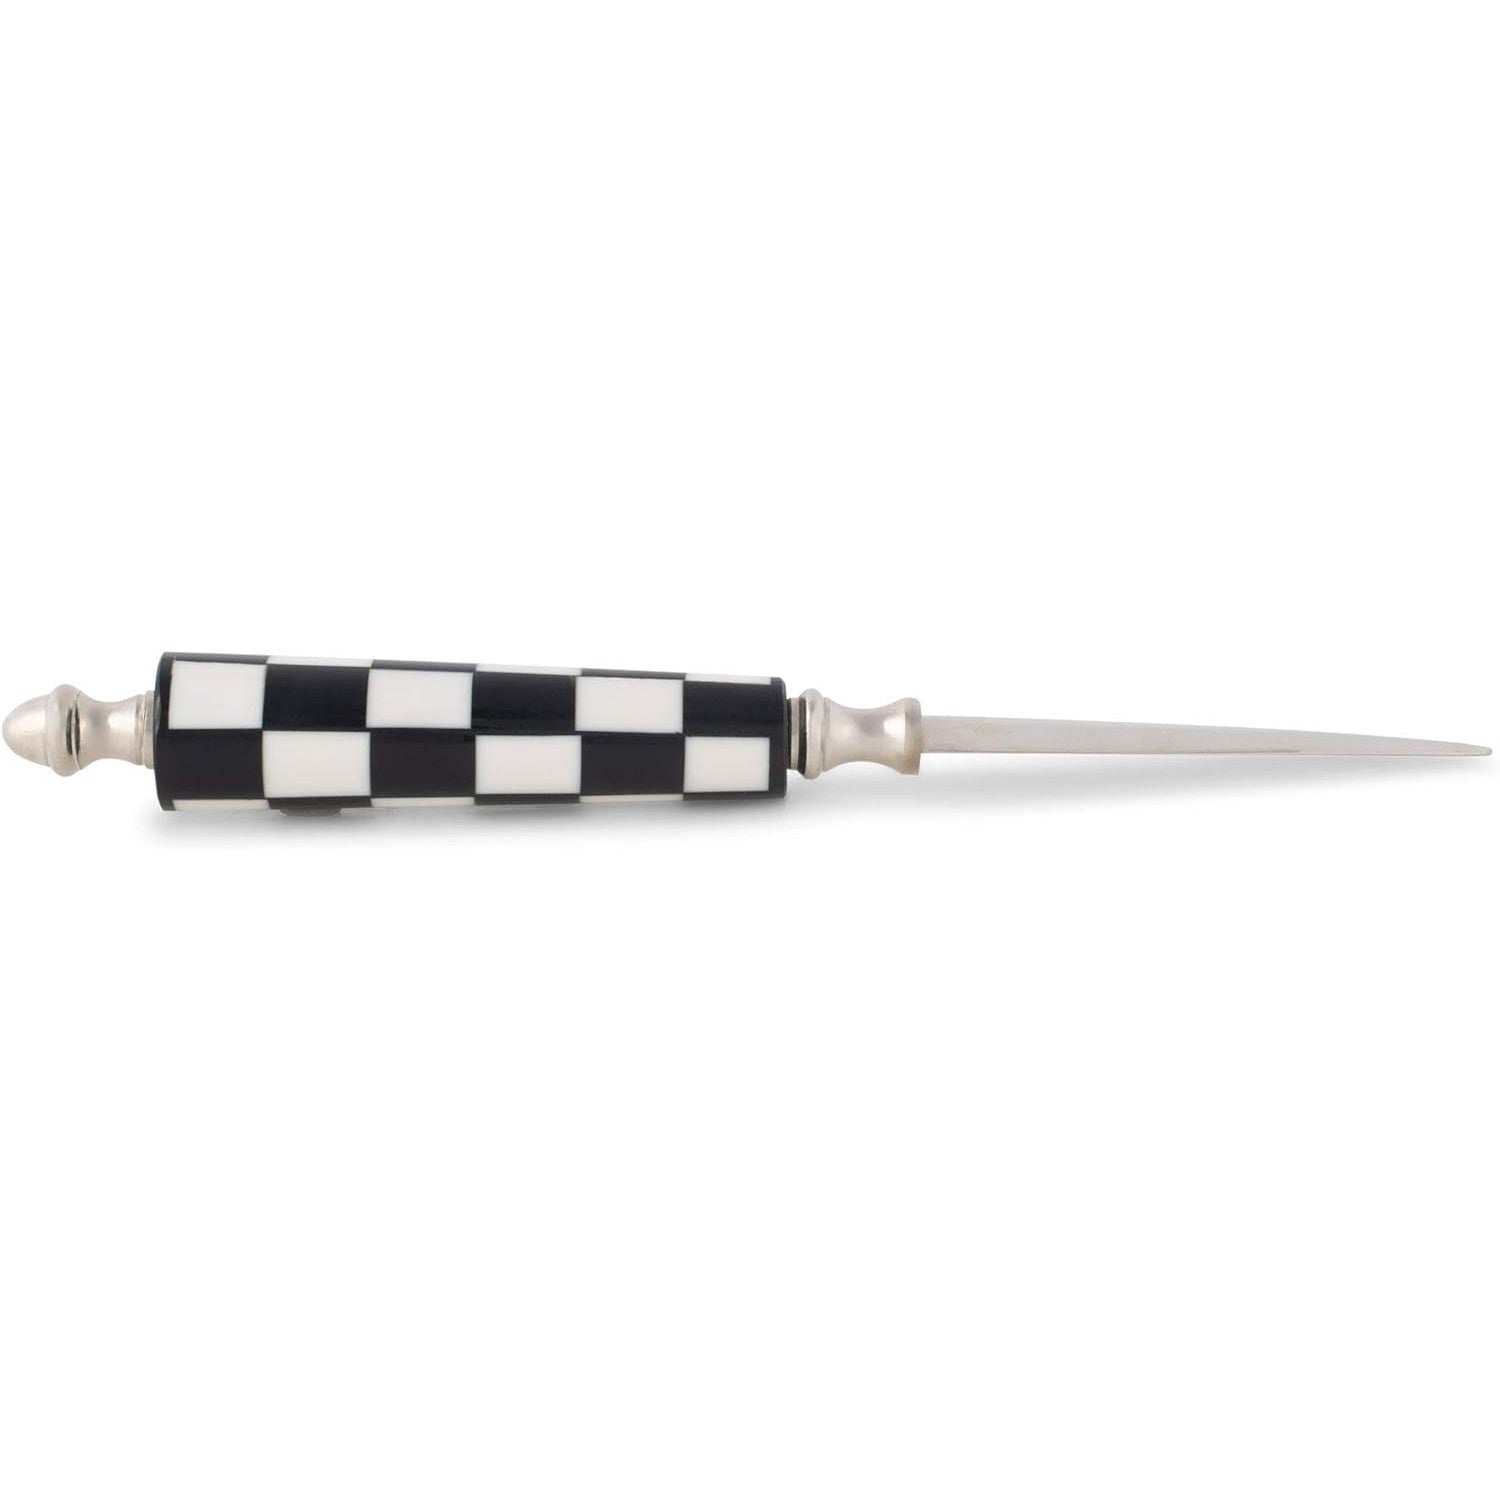 Checkered Envelope Cutter in Black and White | Aesthetic Vintage Desk Decor